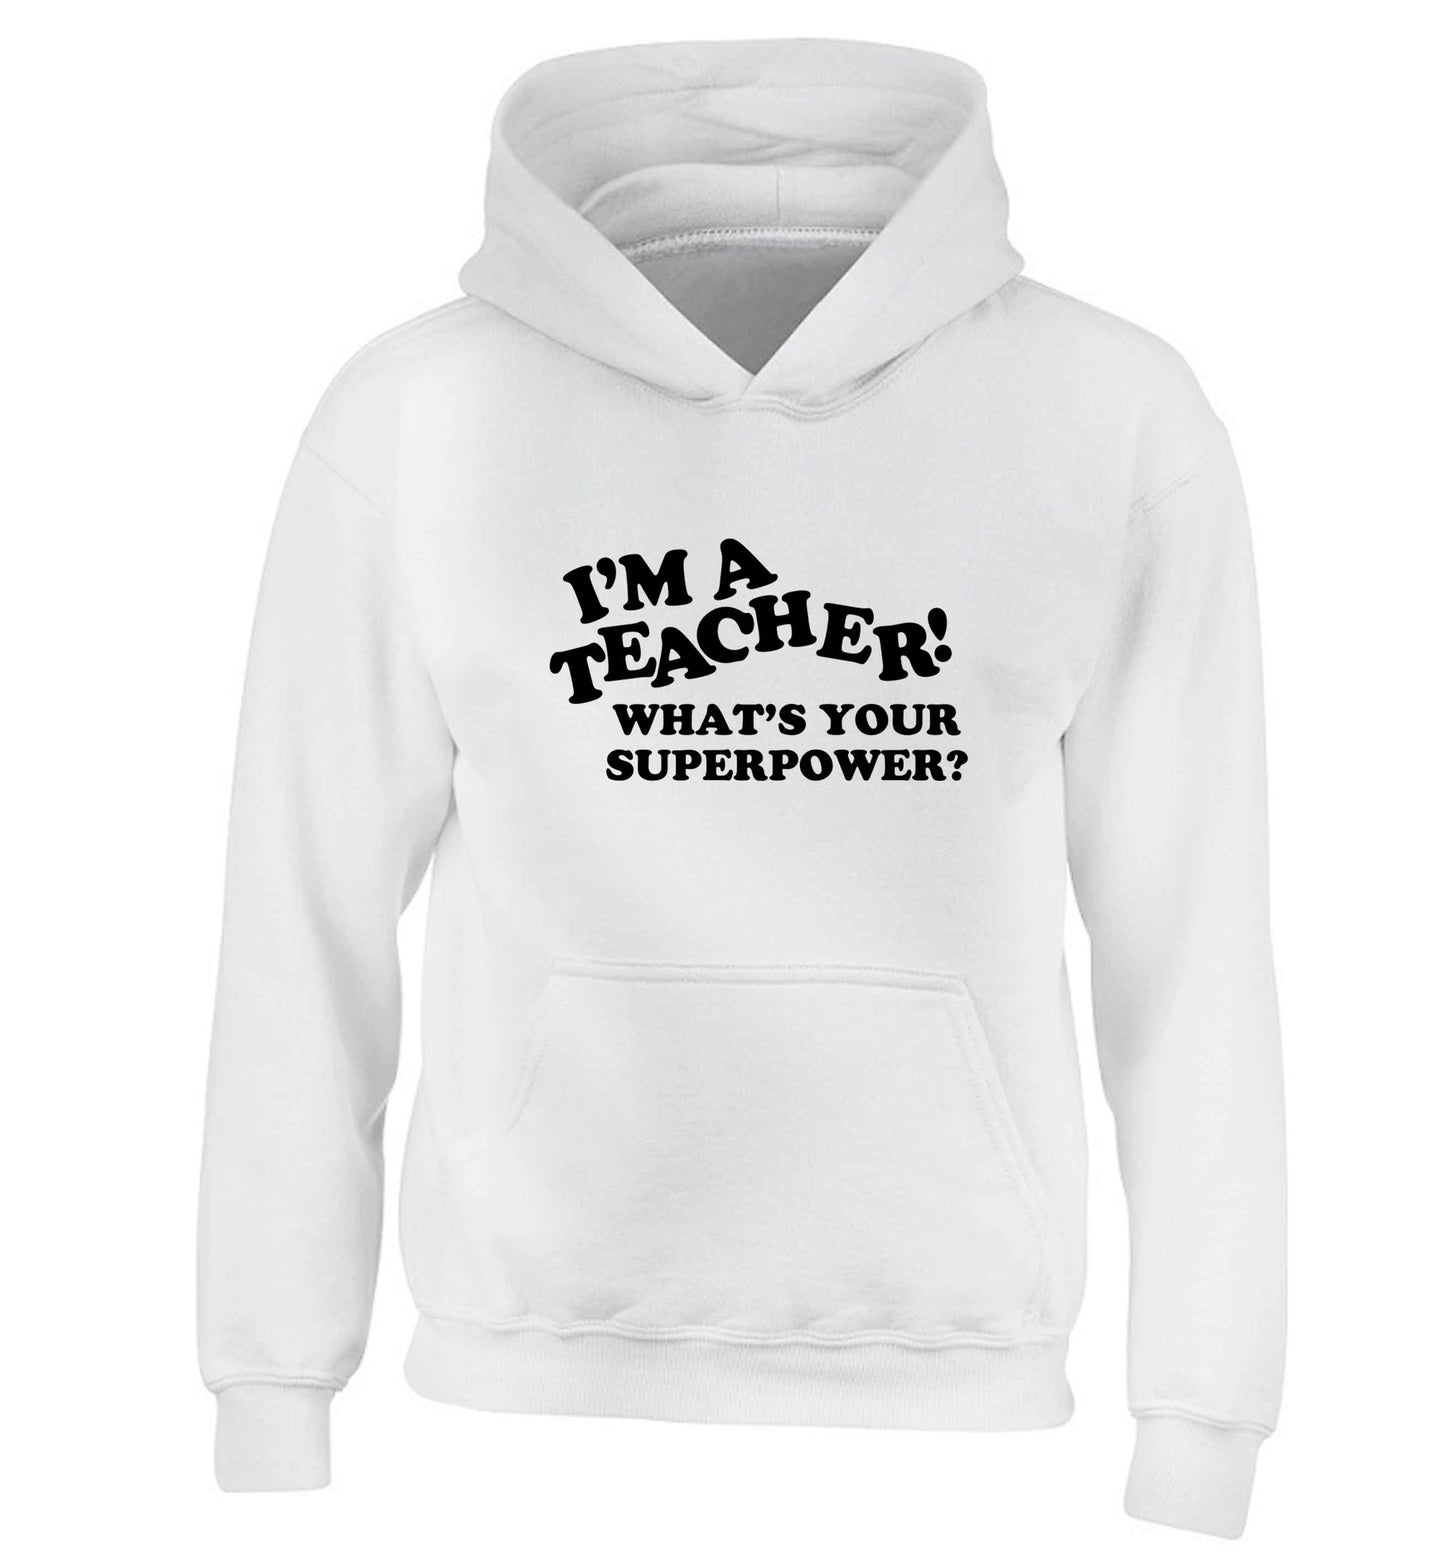 I'm a teacher what's your superpower?! children's white hoodie 12-13 Years